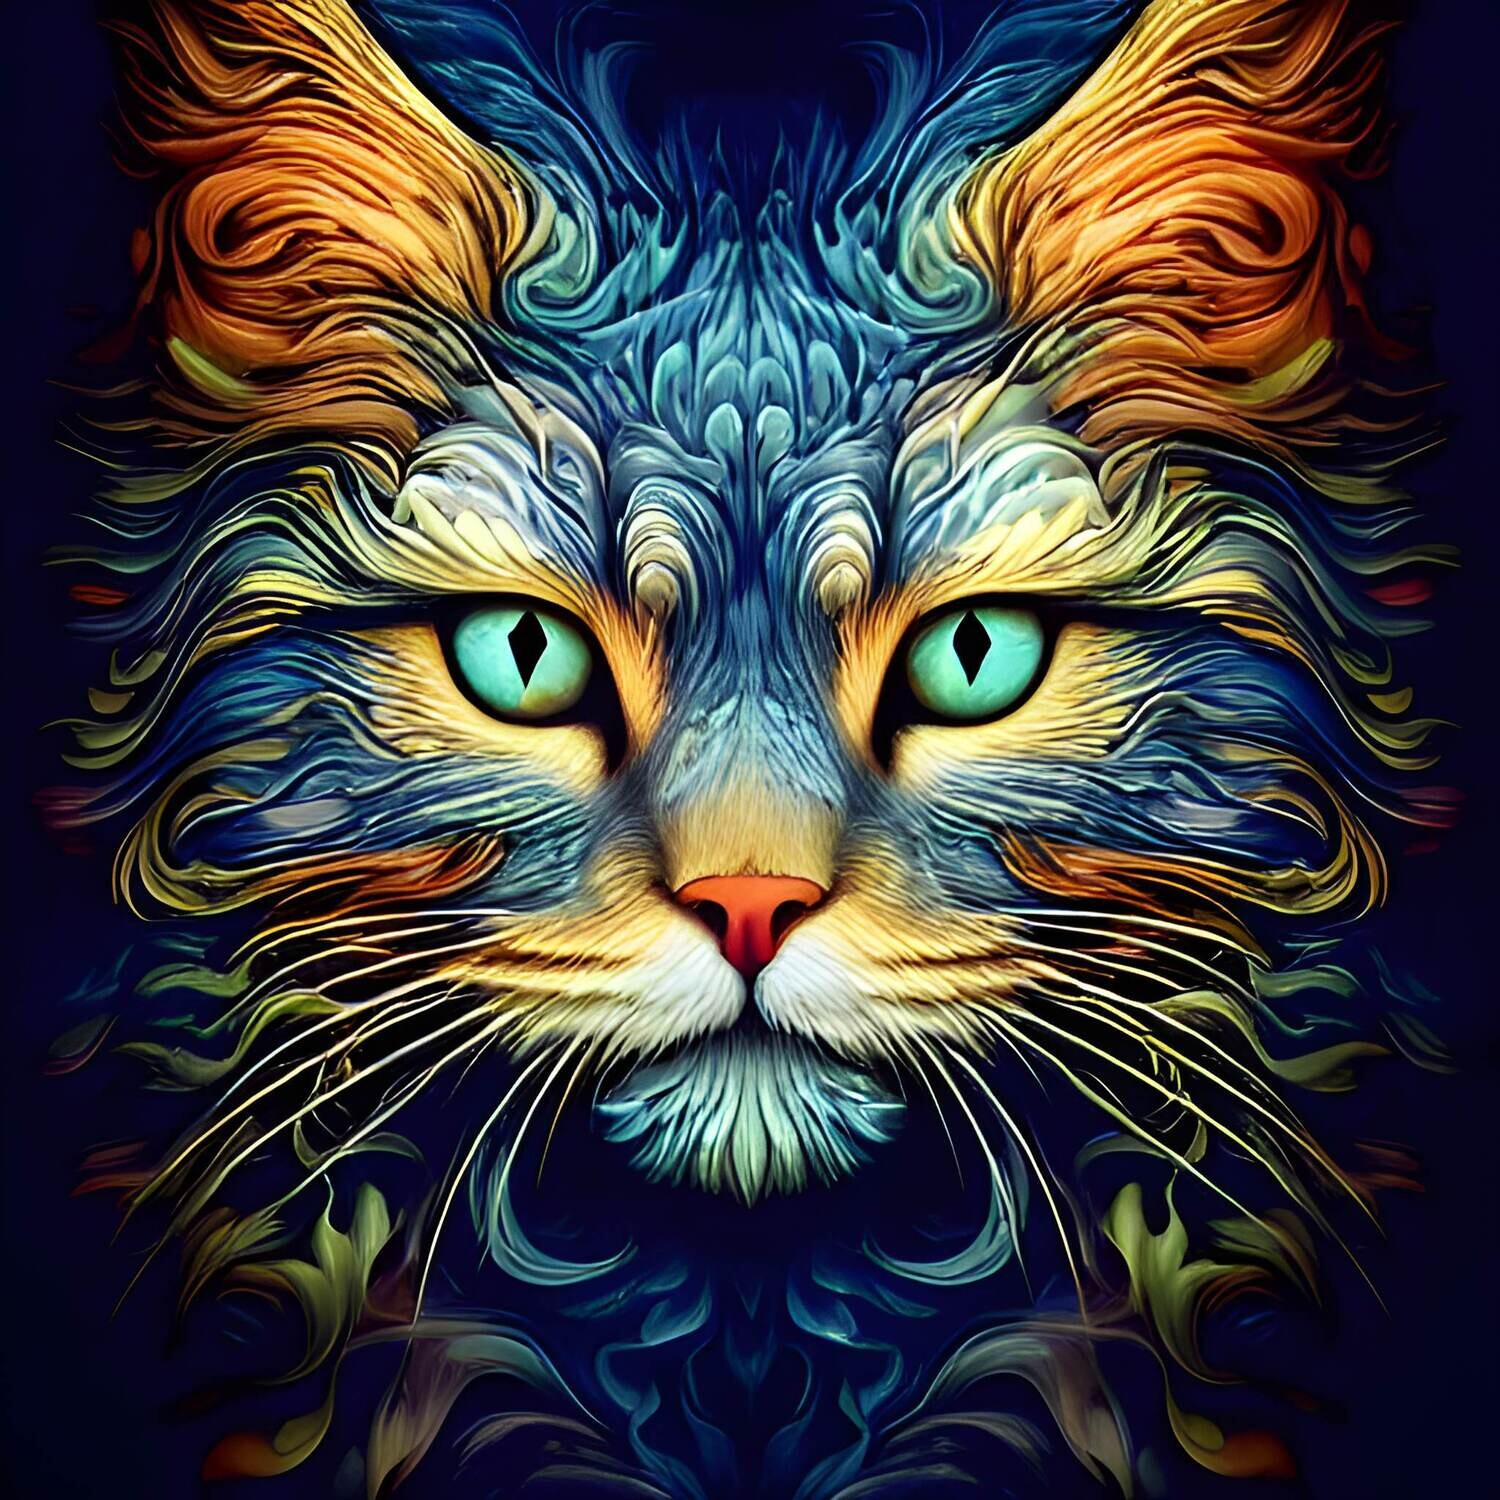 Cat Face 949 - Full Drill Diamond Painting - Specially ordered for you. Delivery is approximately 4 - 6 weeks.